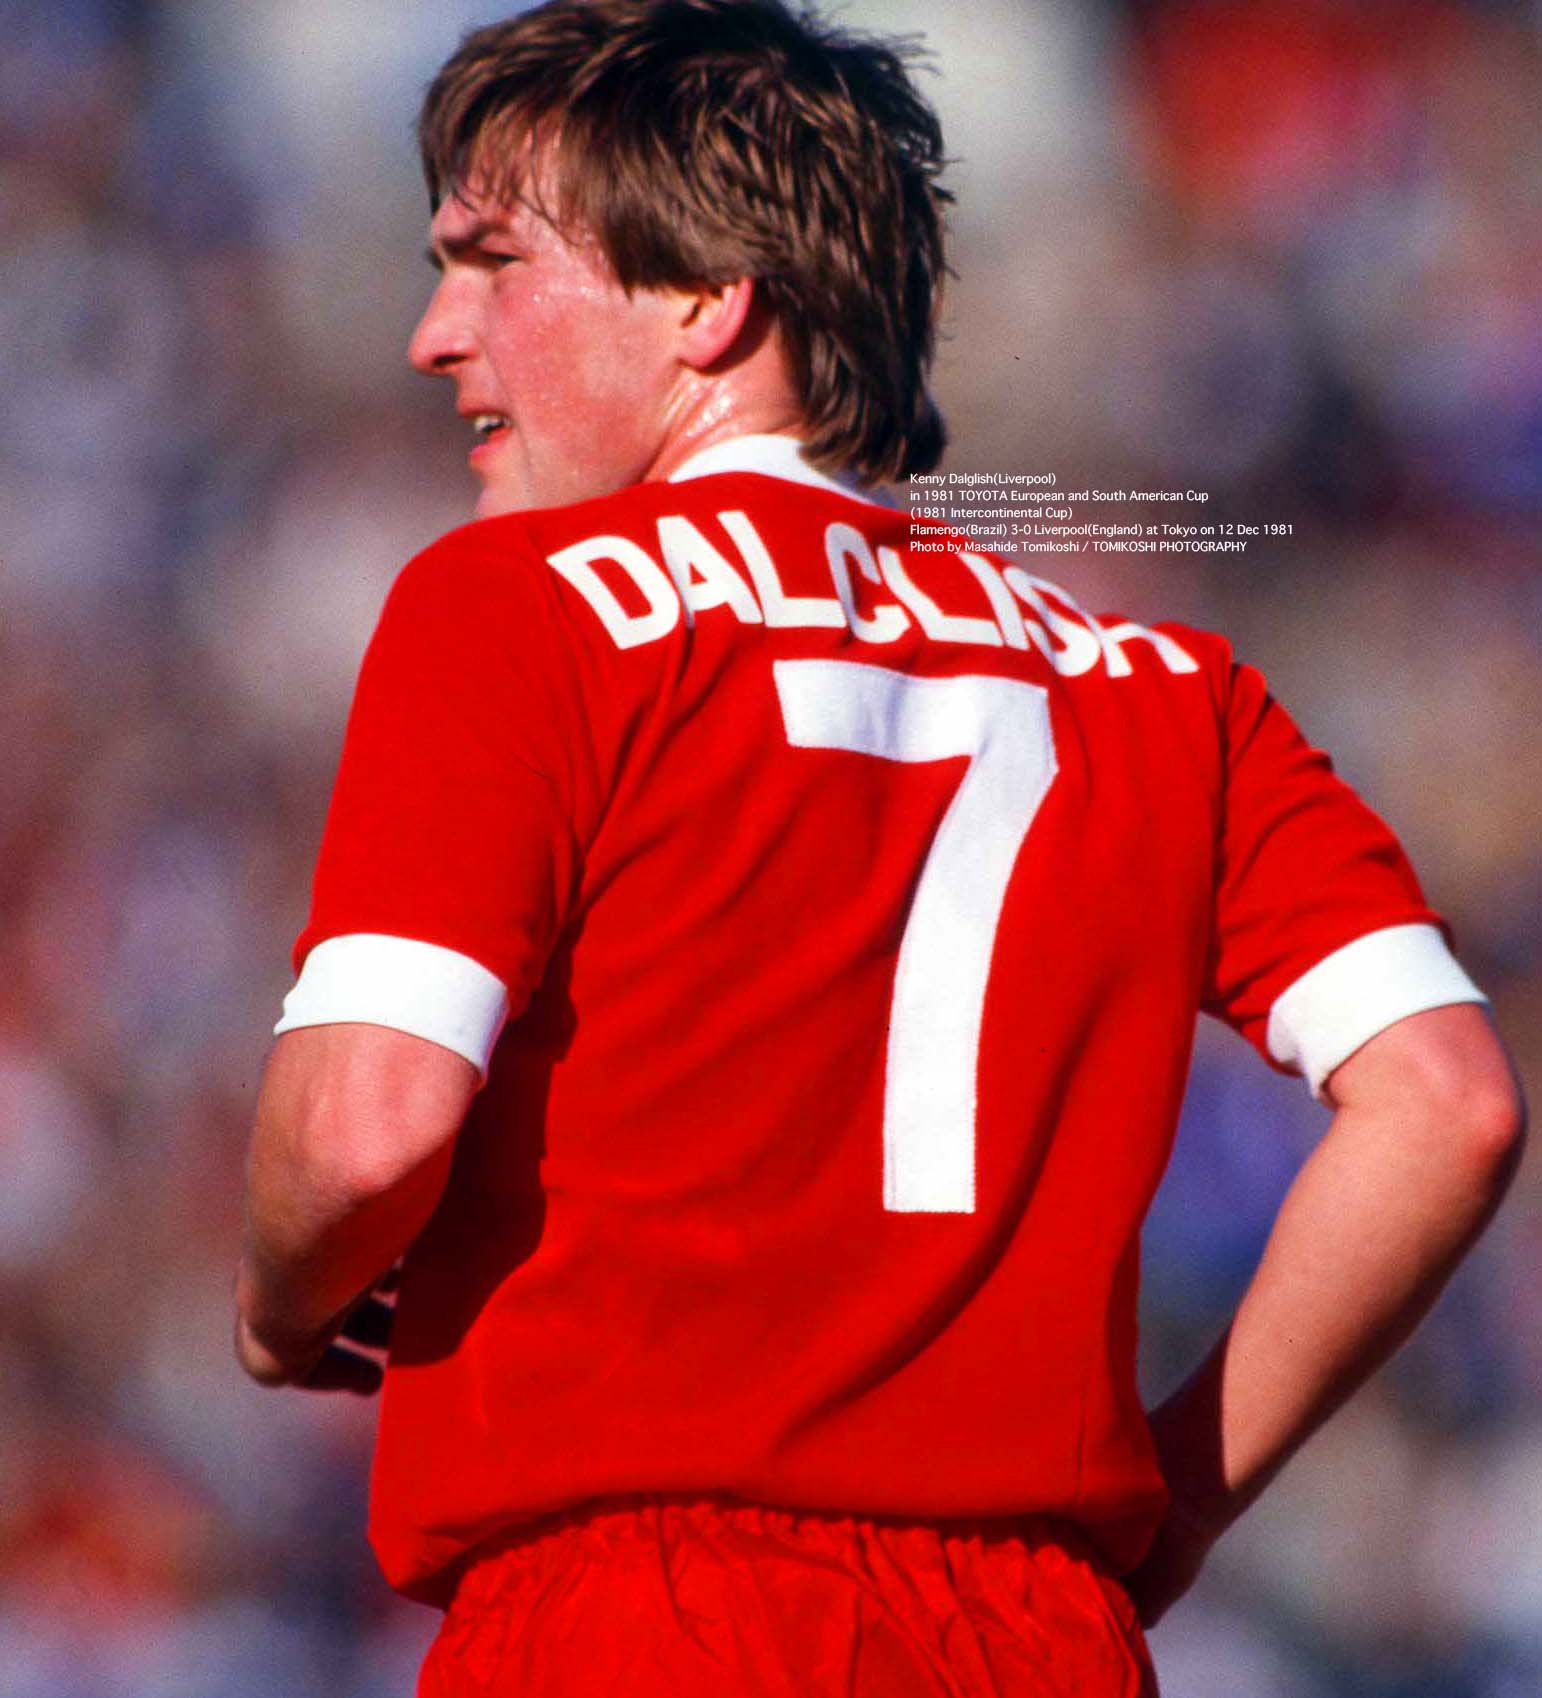 Tphoto Kenny Dalglish Liverpool 1981 Toyota European And South American Cup 1981 Intercontinental Cup Flamengo Brazil 3 0 Liverpool England At Tokyo On 12 Dec 1981 Photo By Masahide Tomikoshi Tomikoshi Photography T Co